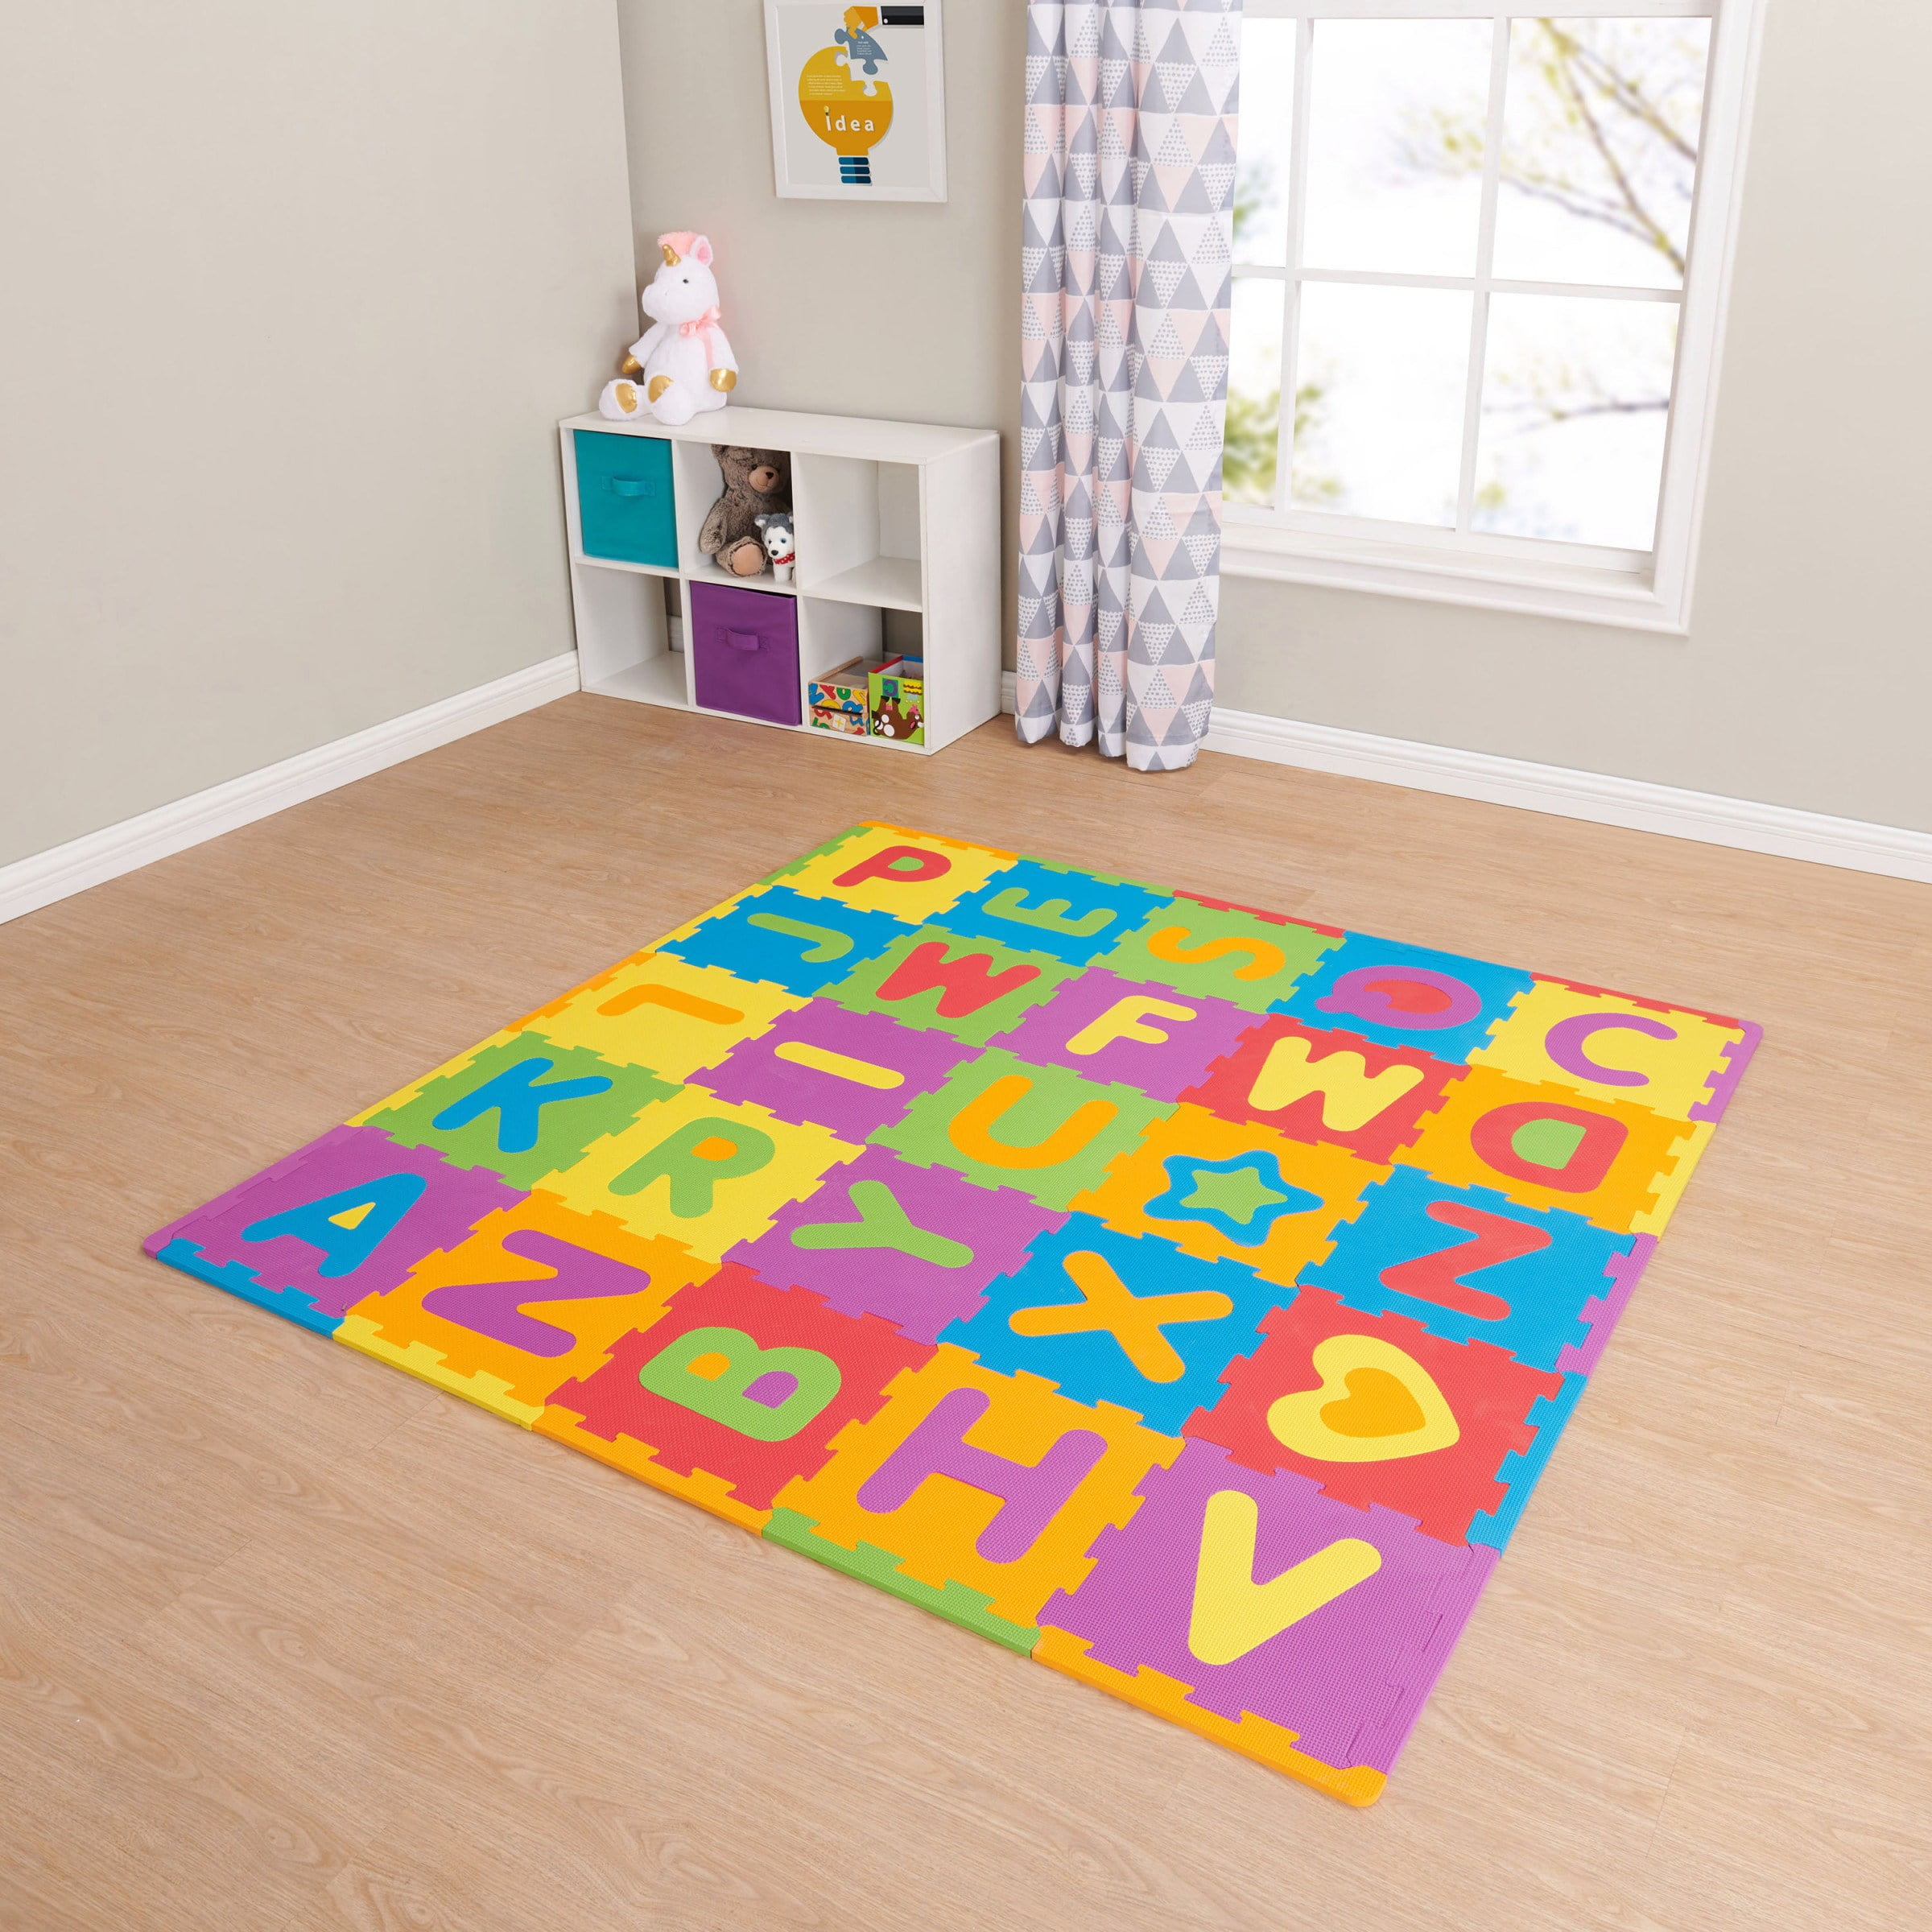 Includes Carry Case LuckyBear Kids Play Mat 28-Piece 11 x 11 Inches Foam Mats for Kids Alphabet Puzzle Floor Tiles Educational and Fun ABC Rug for Kids Room 